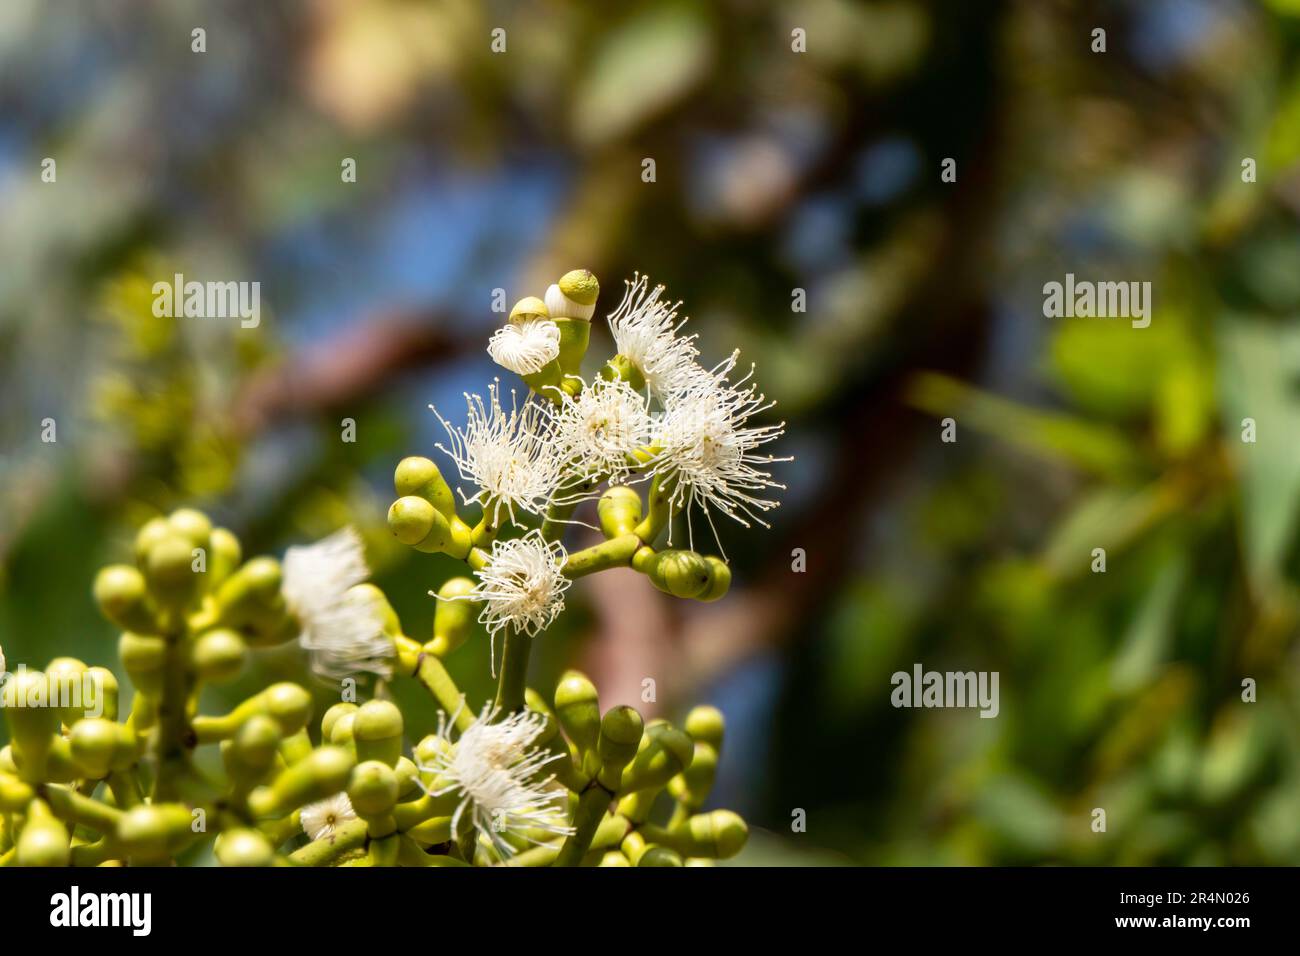 Buds and flowers of a myrtle plant close up on a blurred background. Selective focus Stock Photo